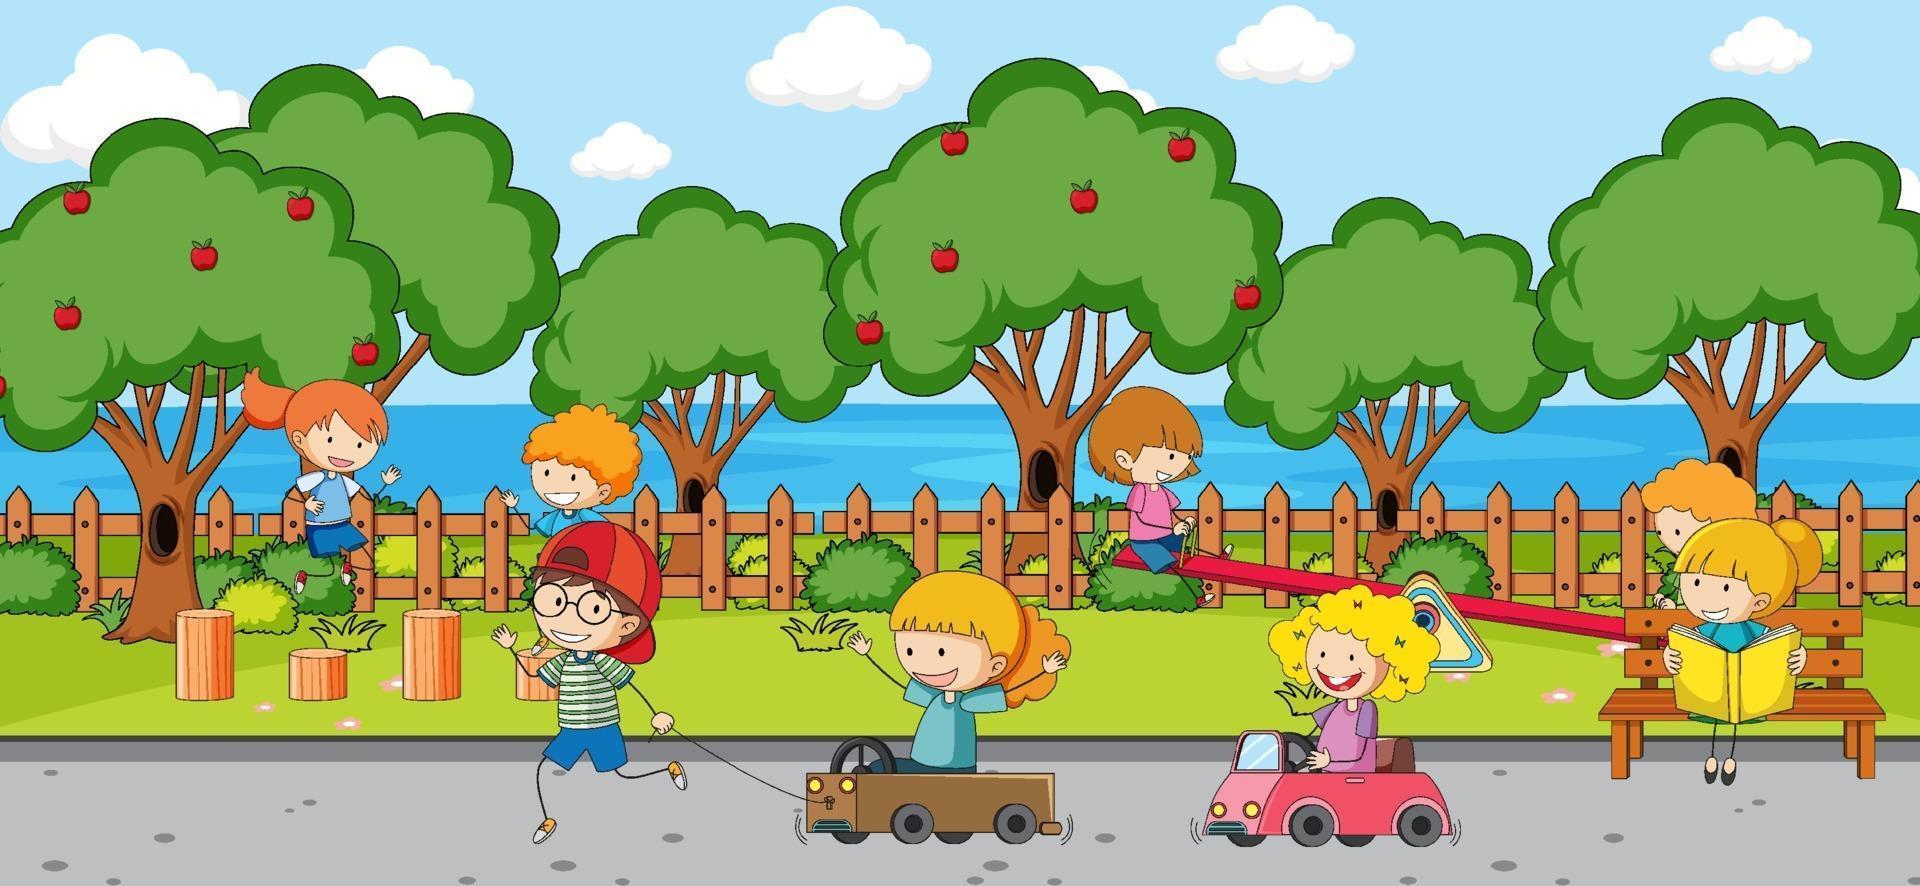 Playground scene with many kids doodle cartoon character vector